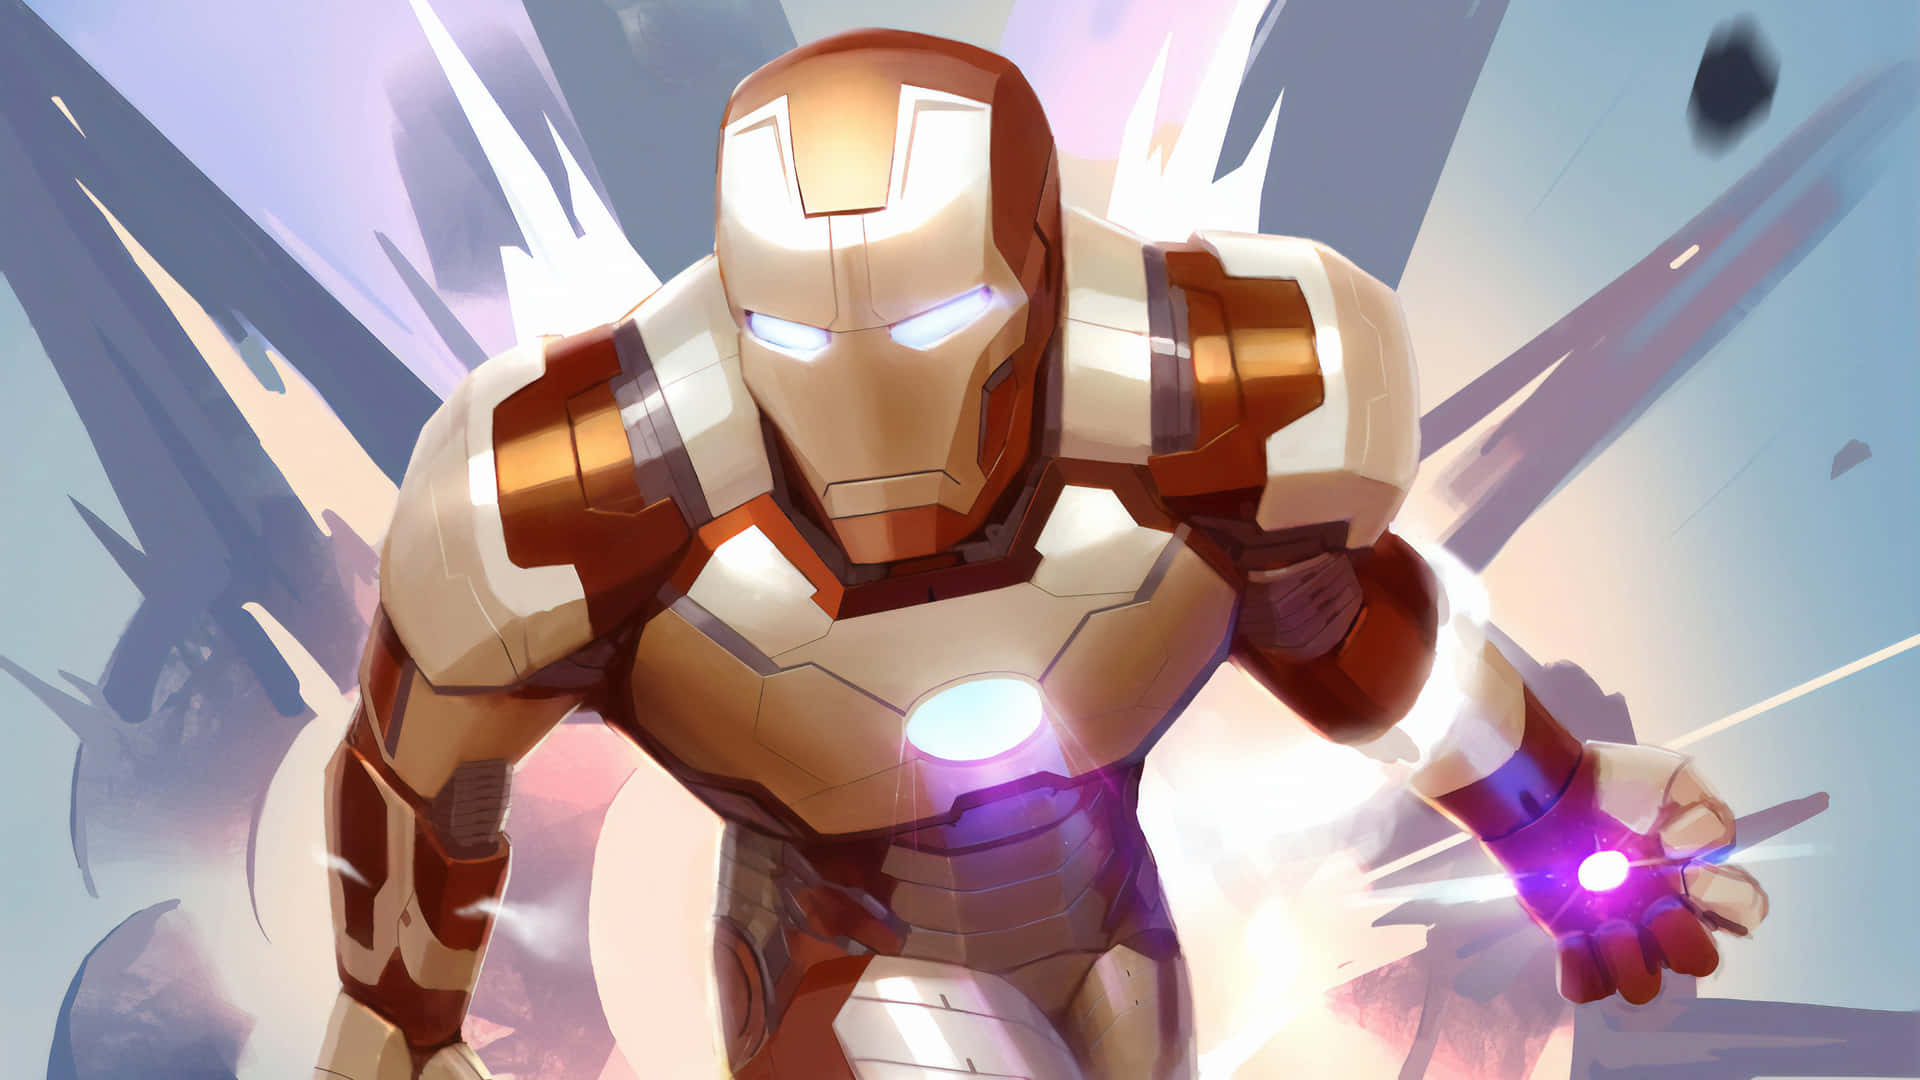 "No Matter What Comes my Way, I'll Always be Iron Man!" Wallpaper